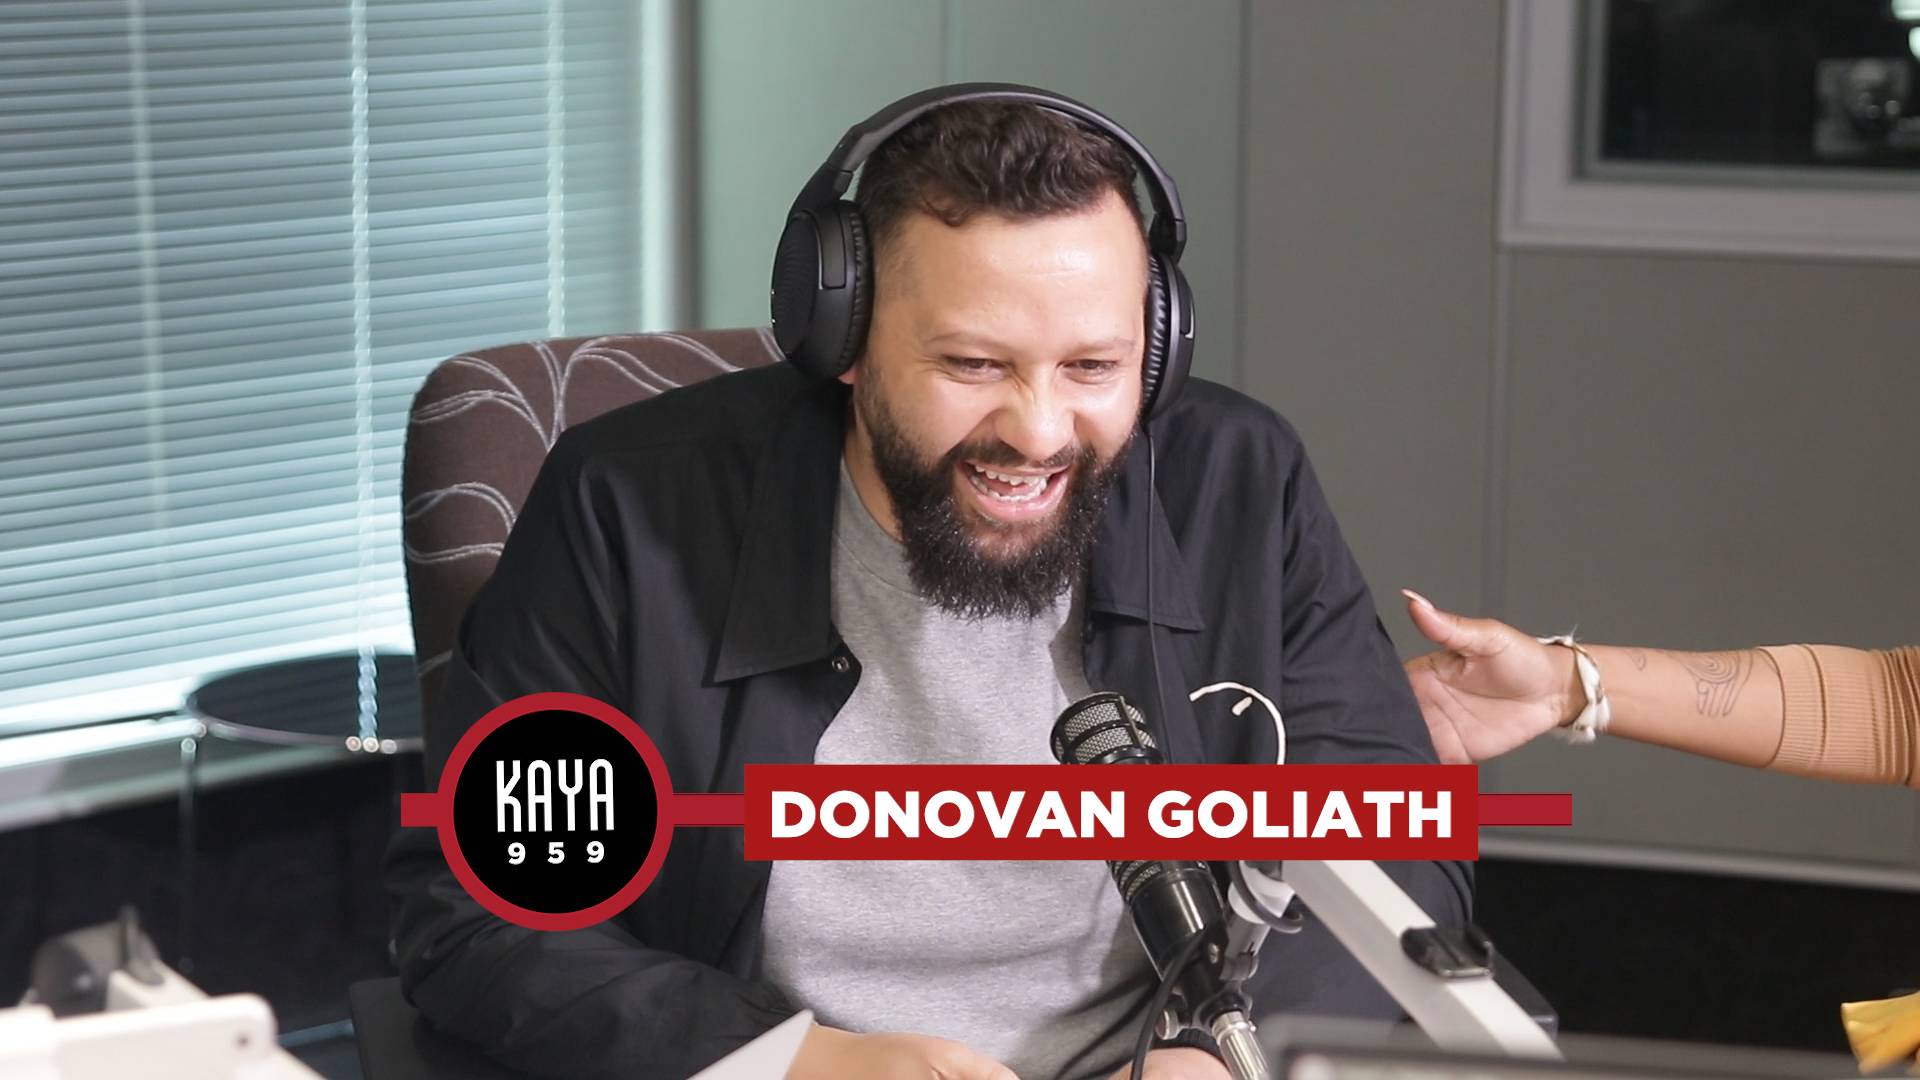 Donovan Goliath on being a first-time father on #959breakfast with Dineo Ranaka and Sol phenduka